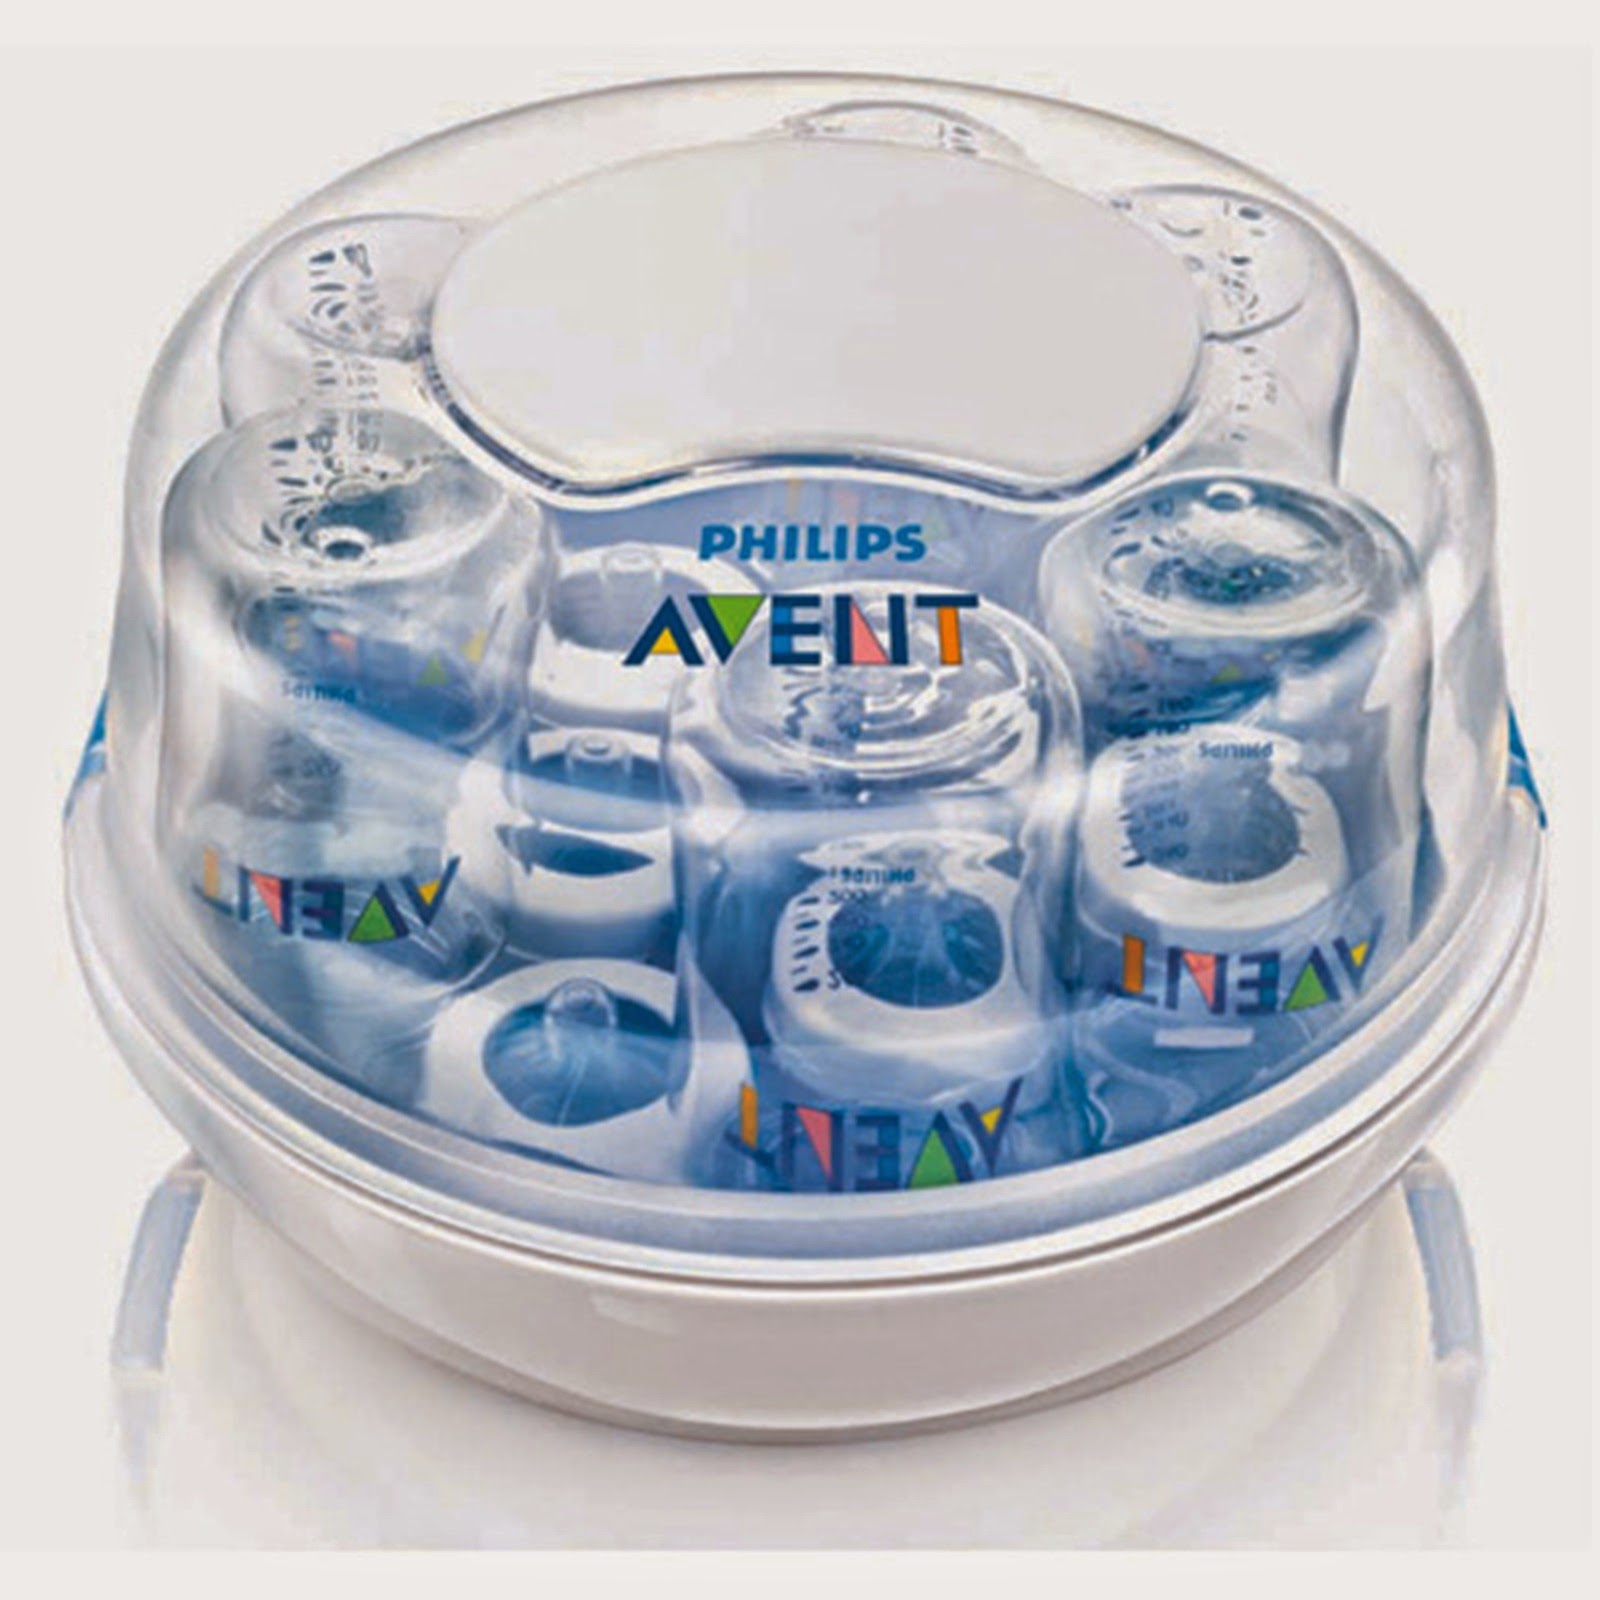 avent sterilizer 2 in 1 instructions